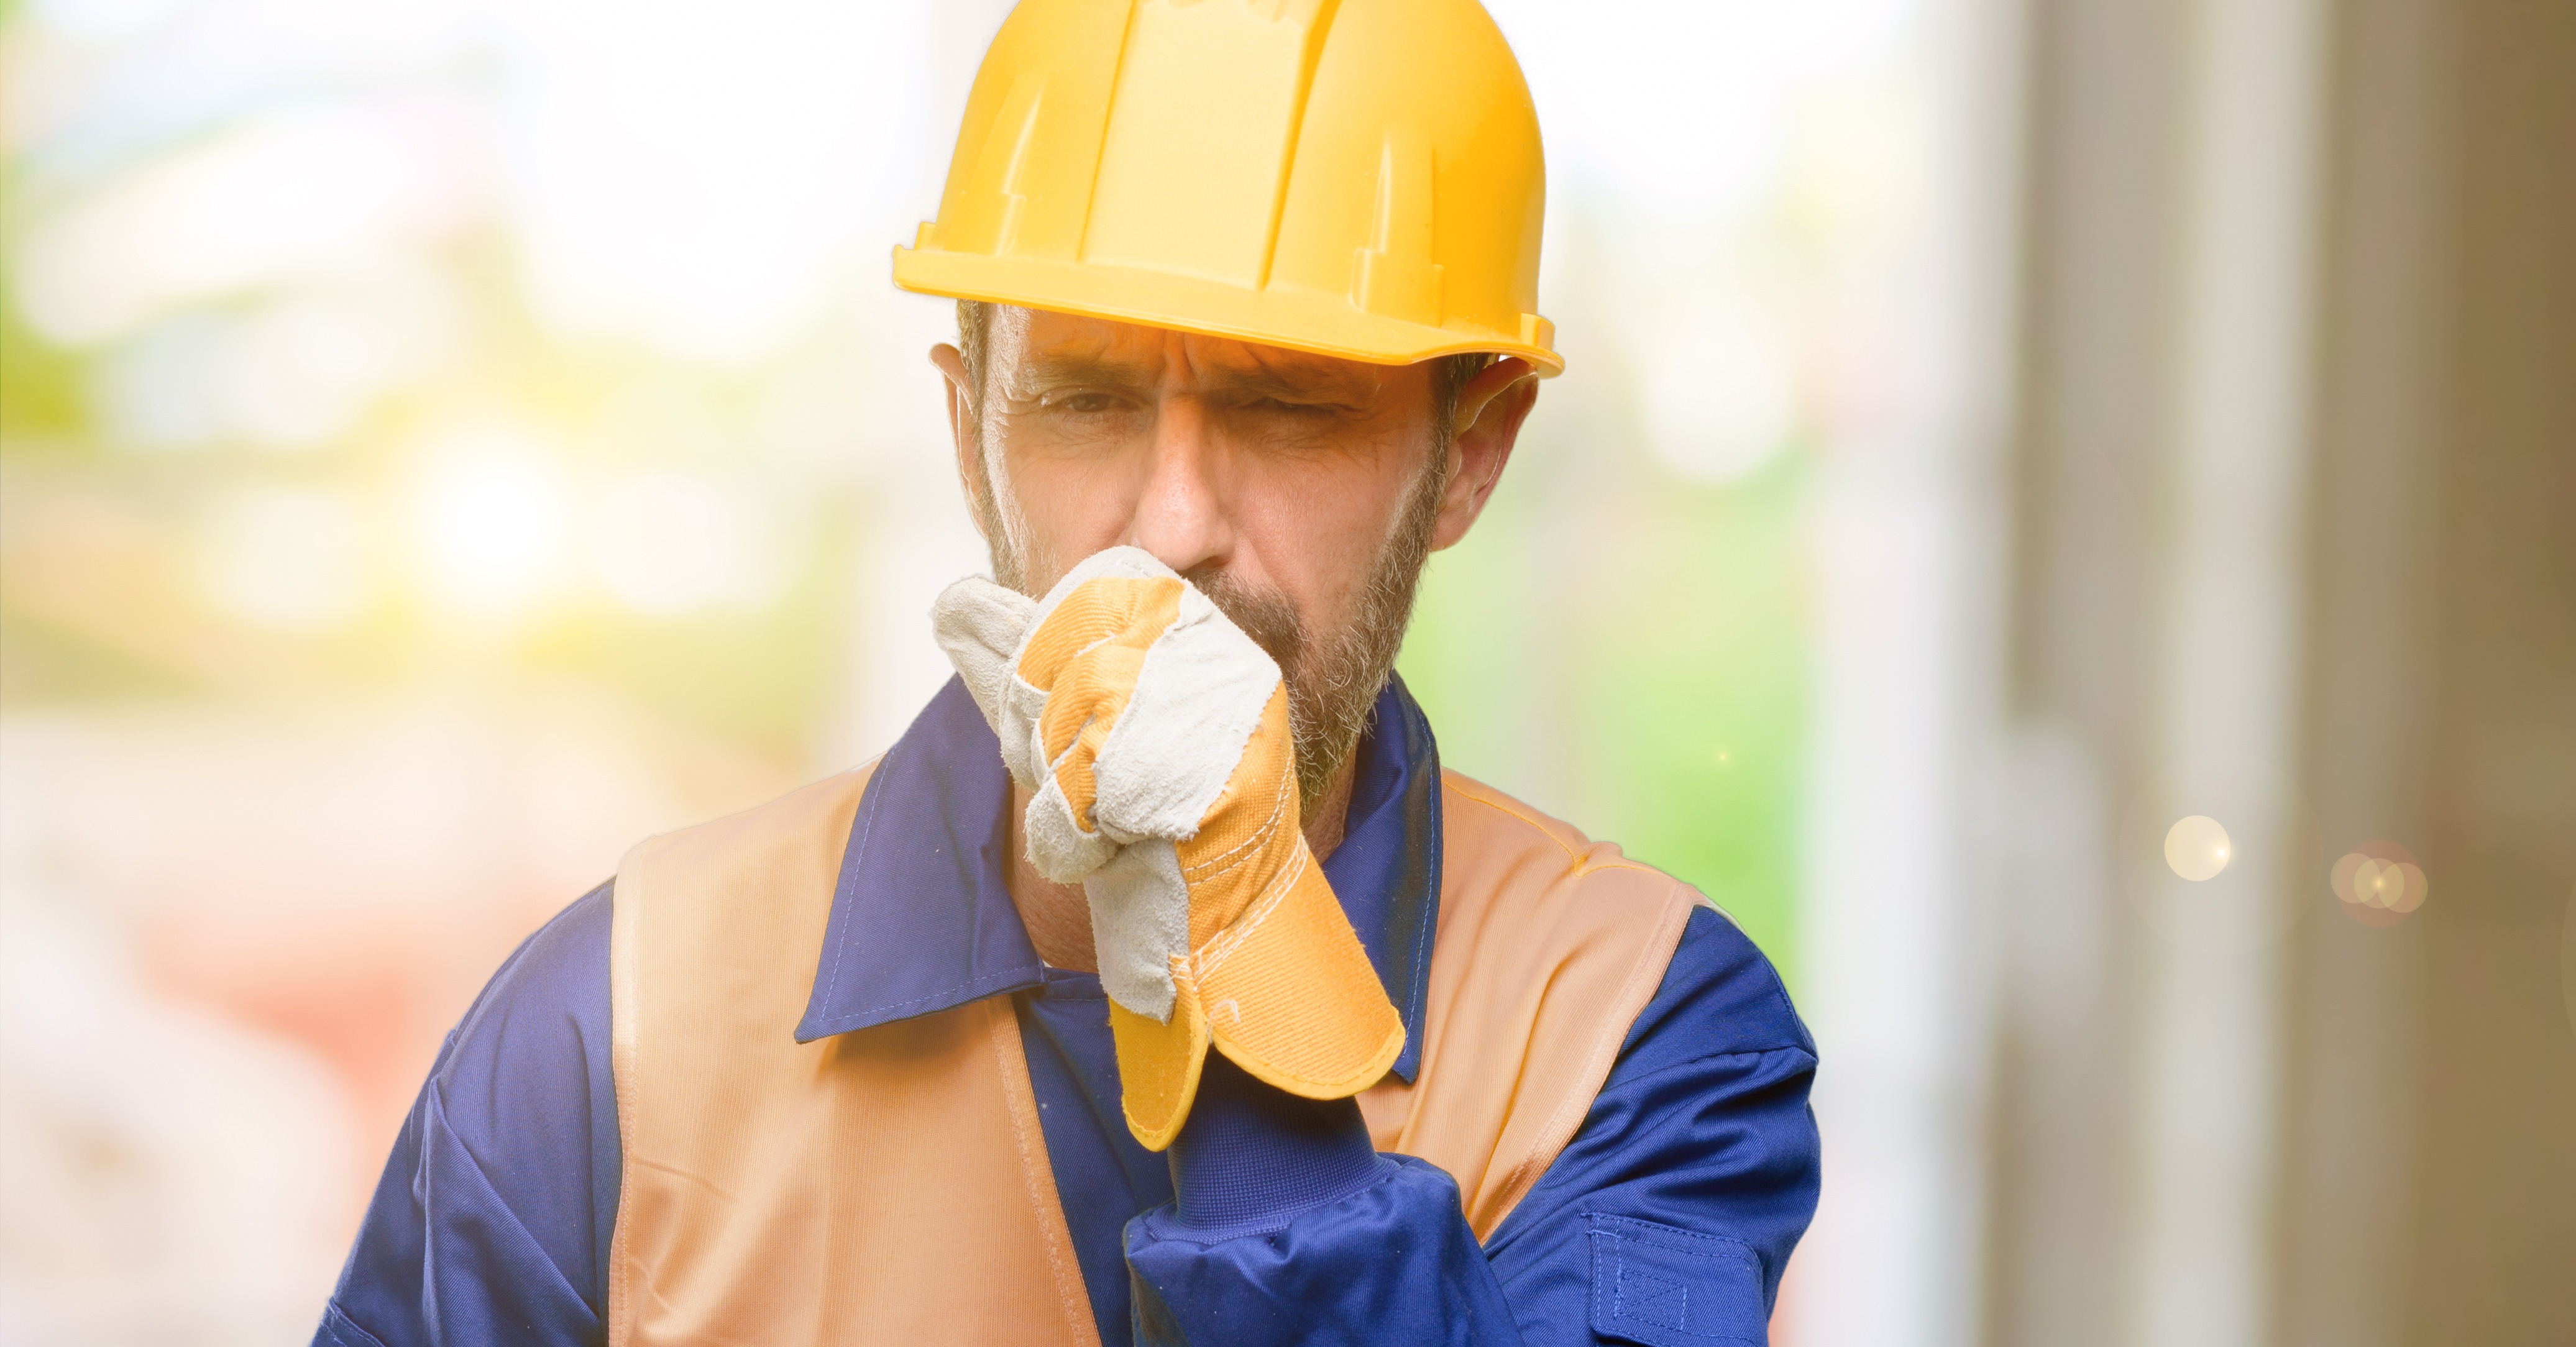 image shows a construction worker coughing